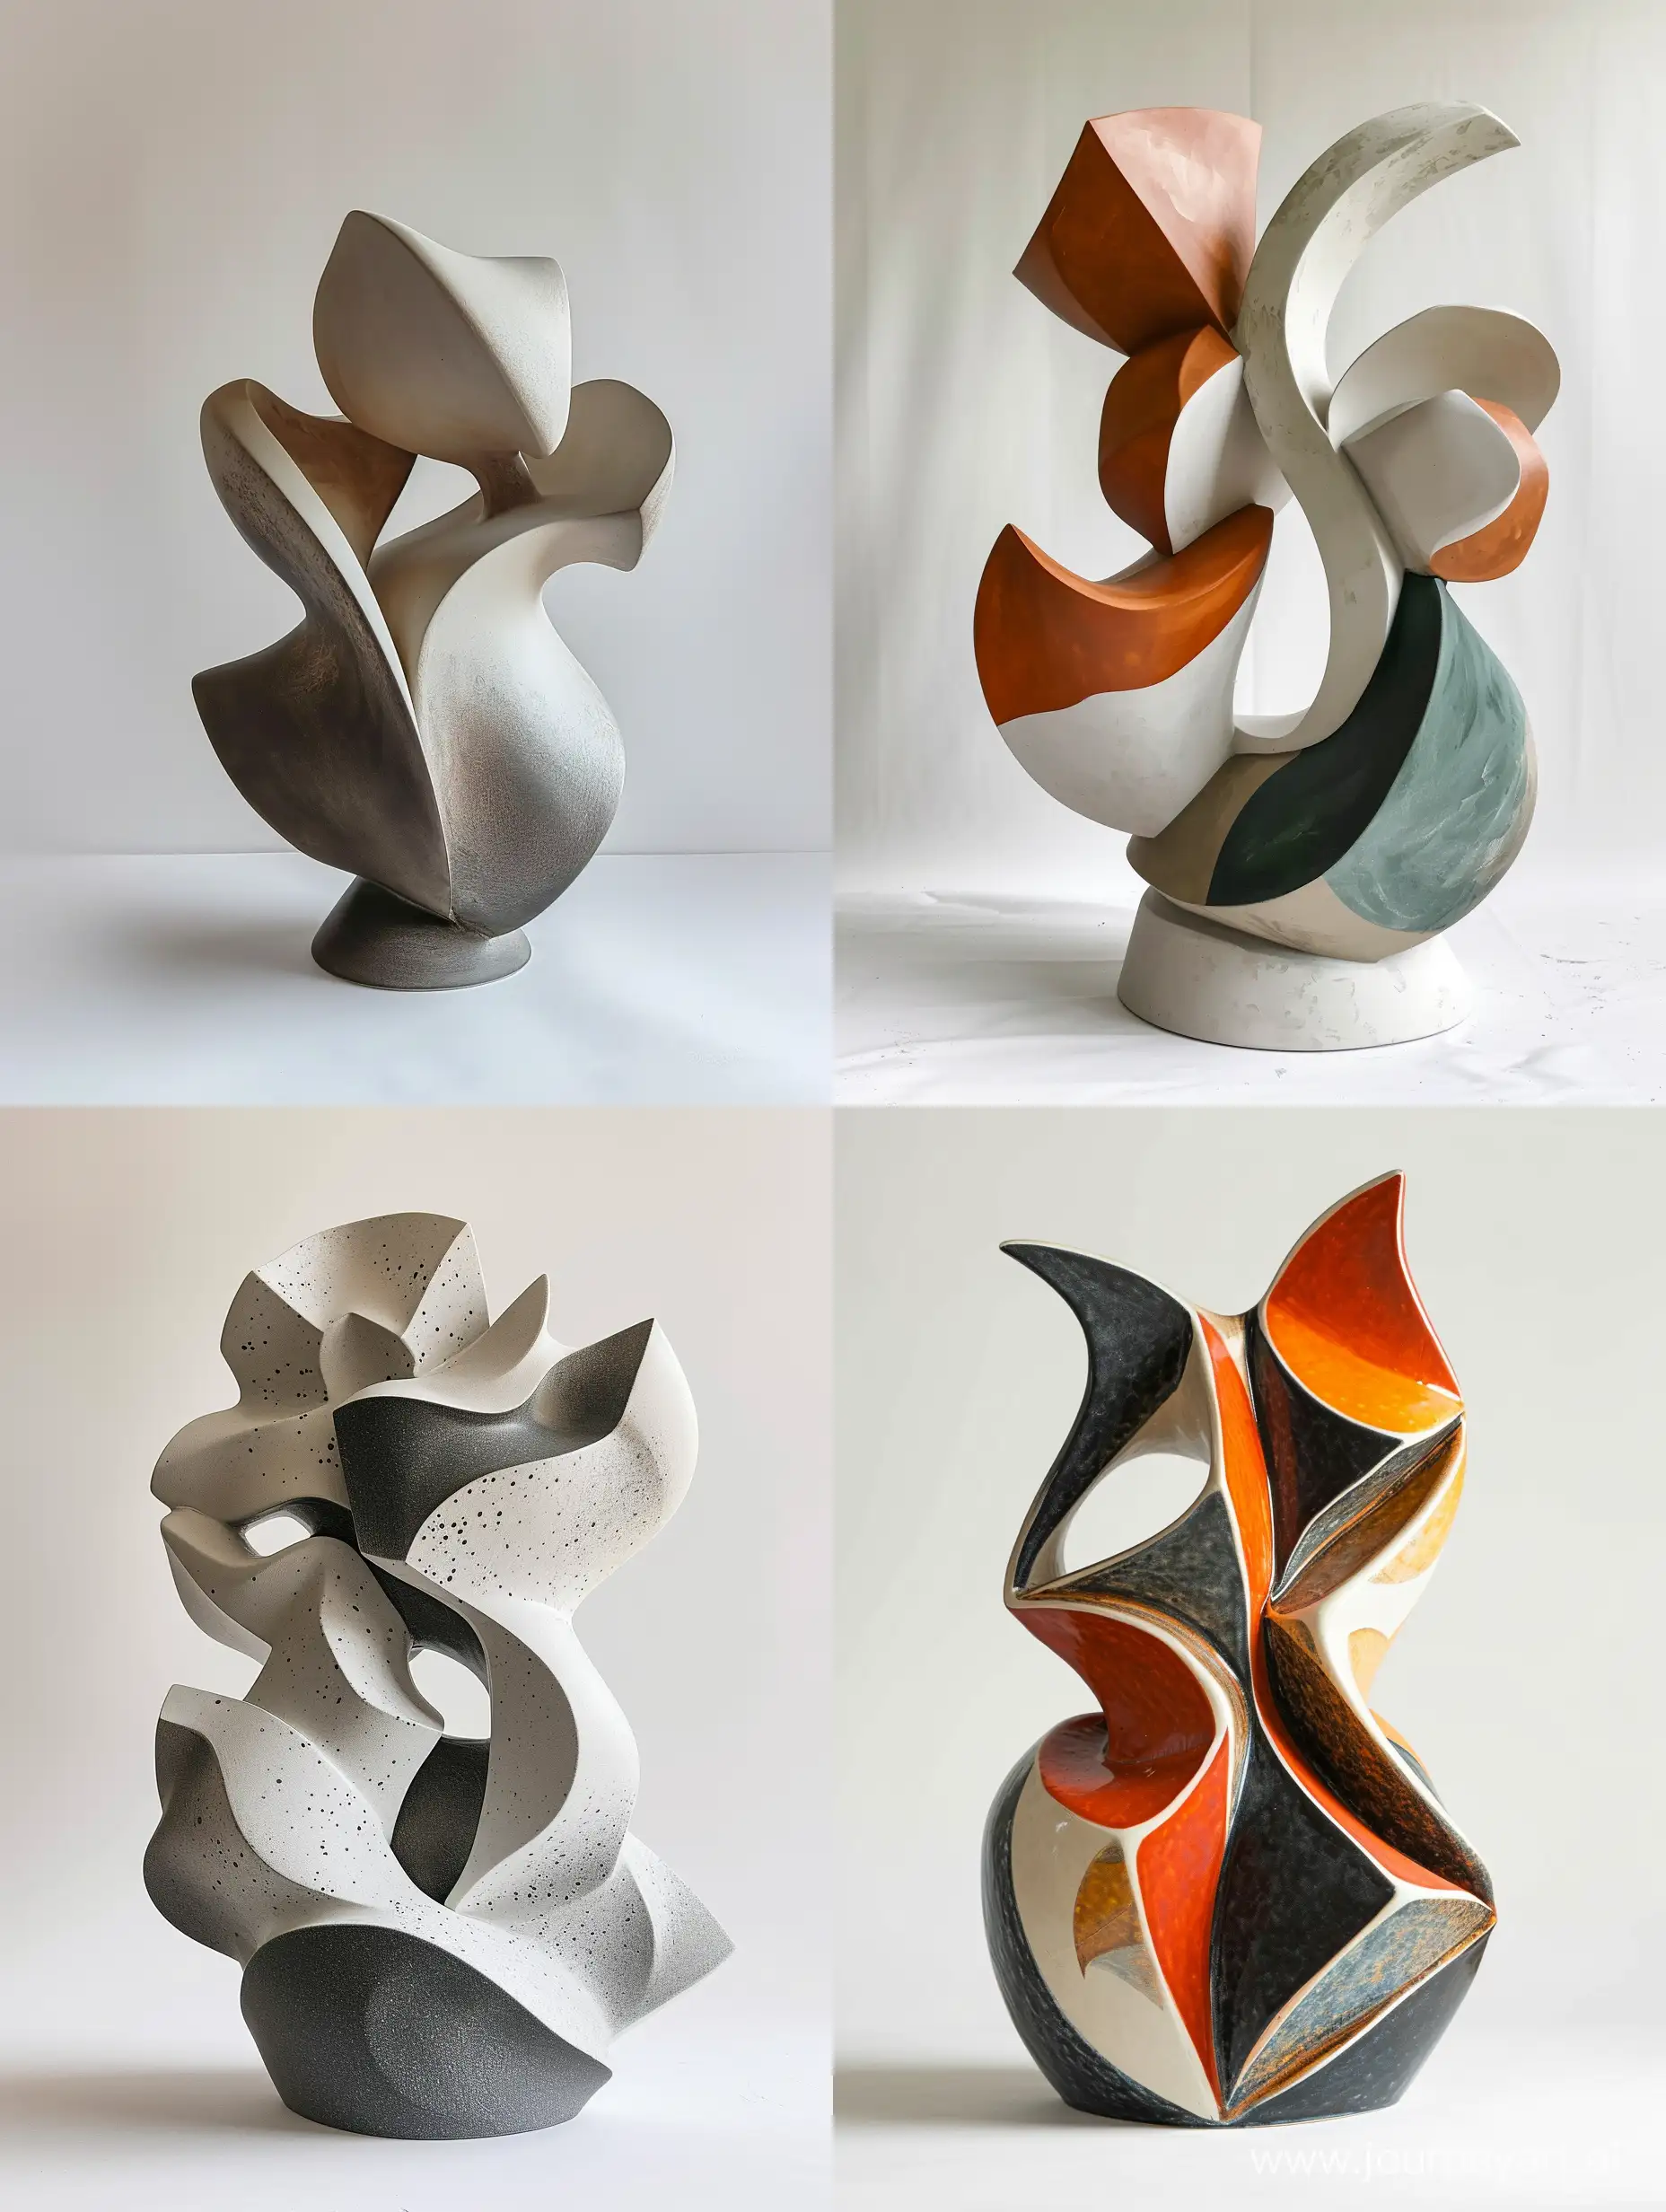 Abstract-Geometric-Ceramic-Sculpture-with-60s-Style-and-High-Contrast